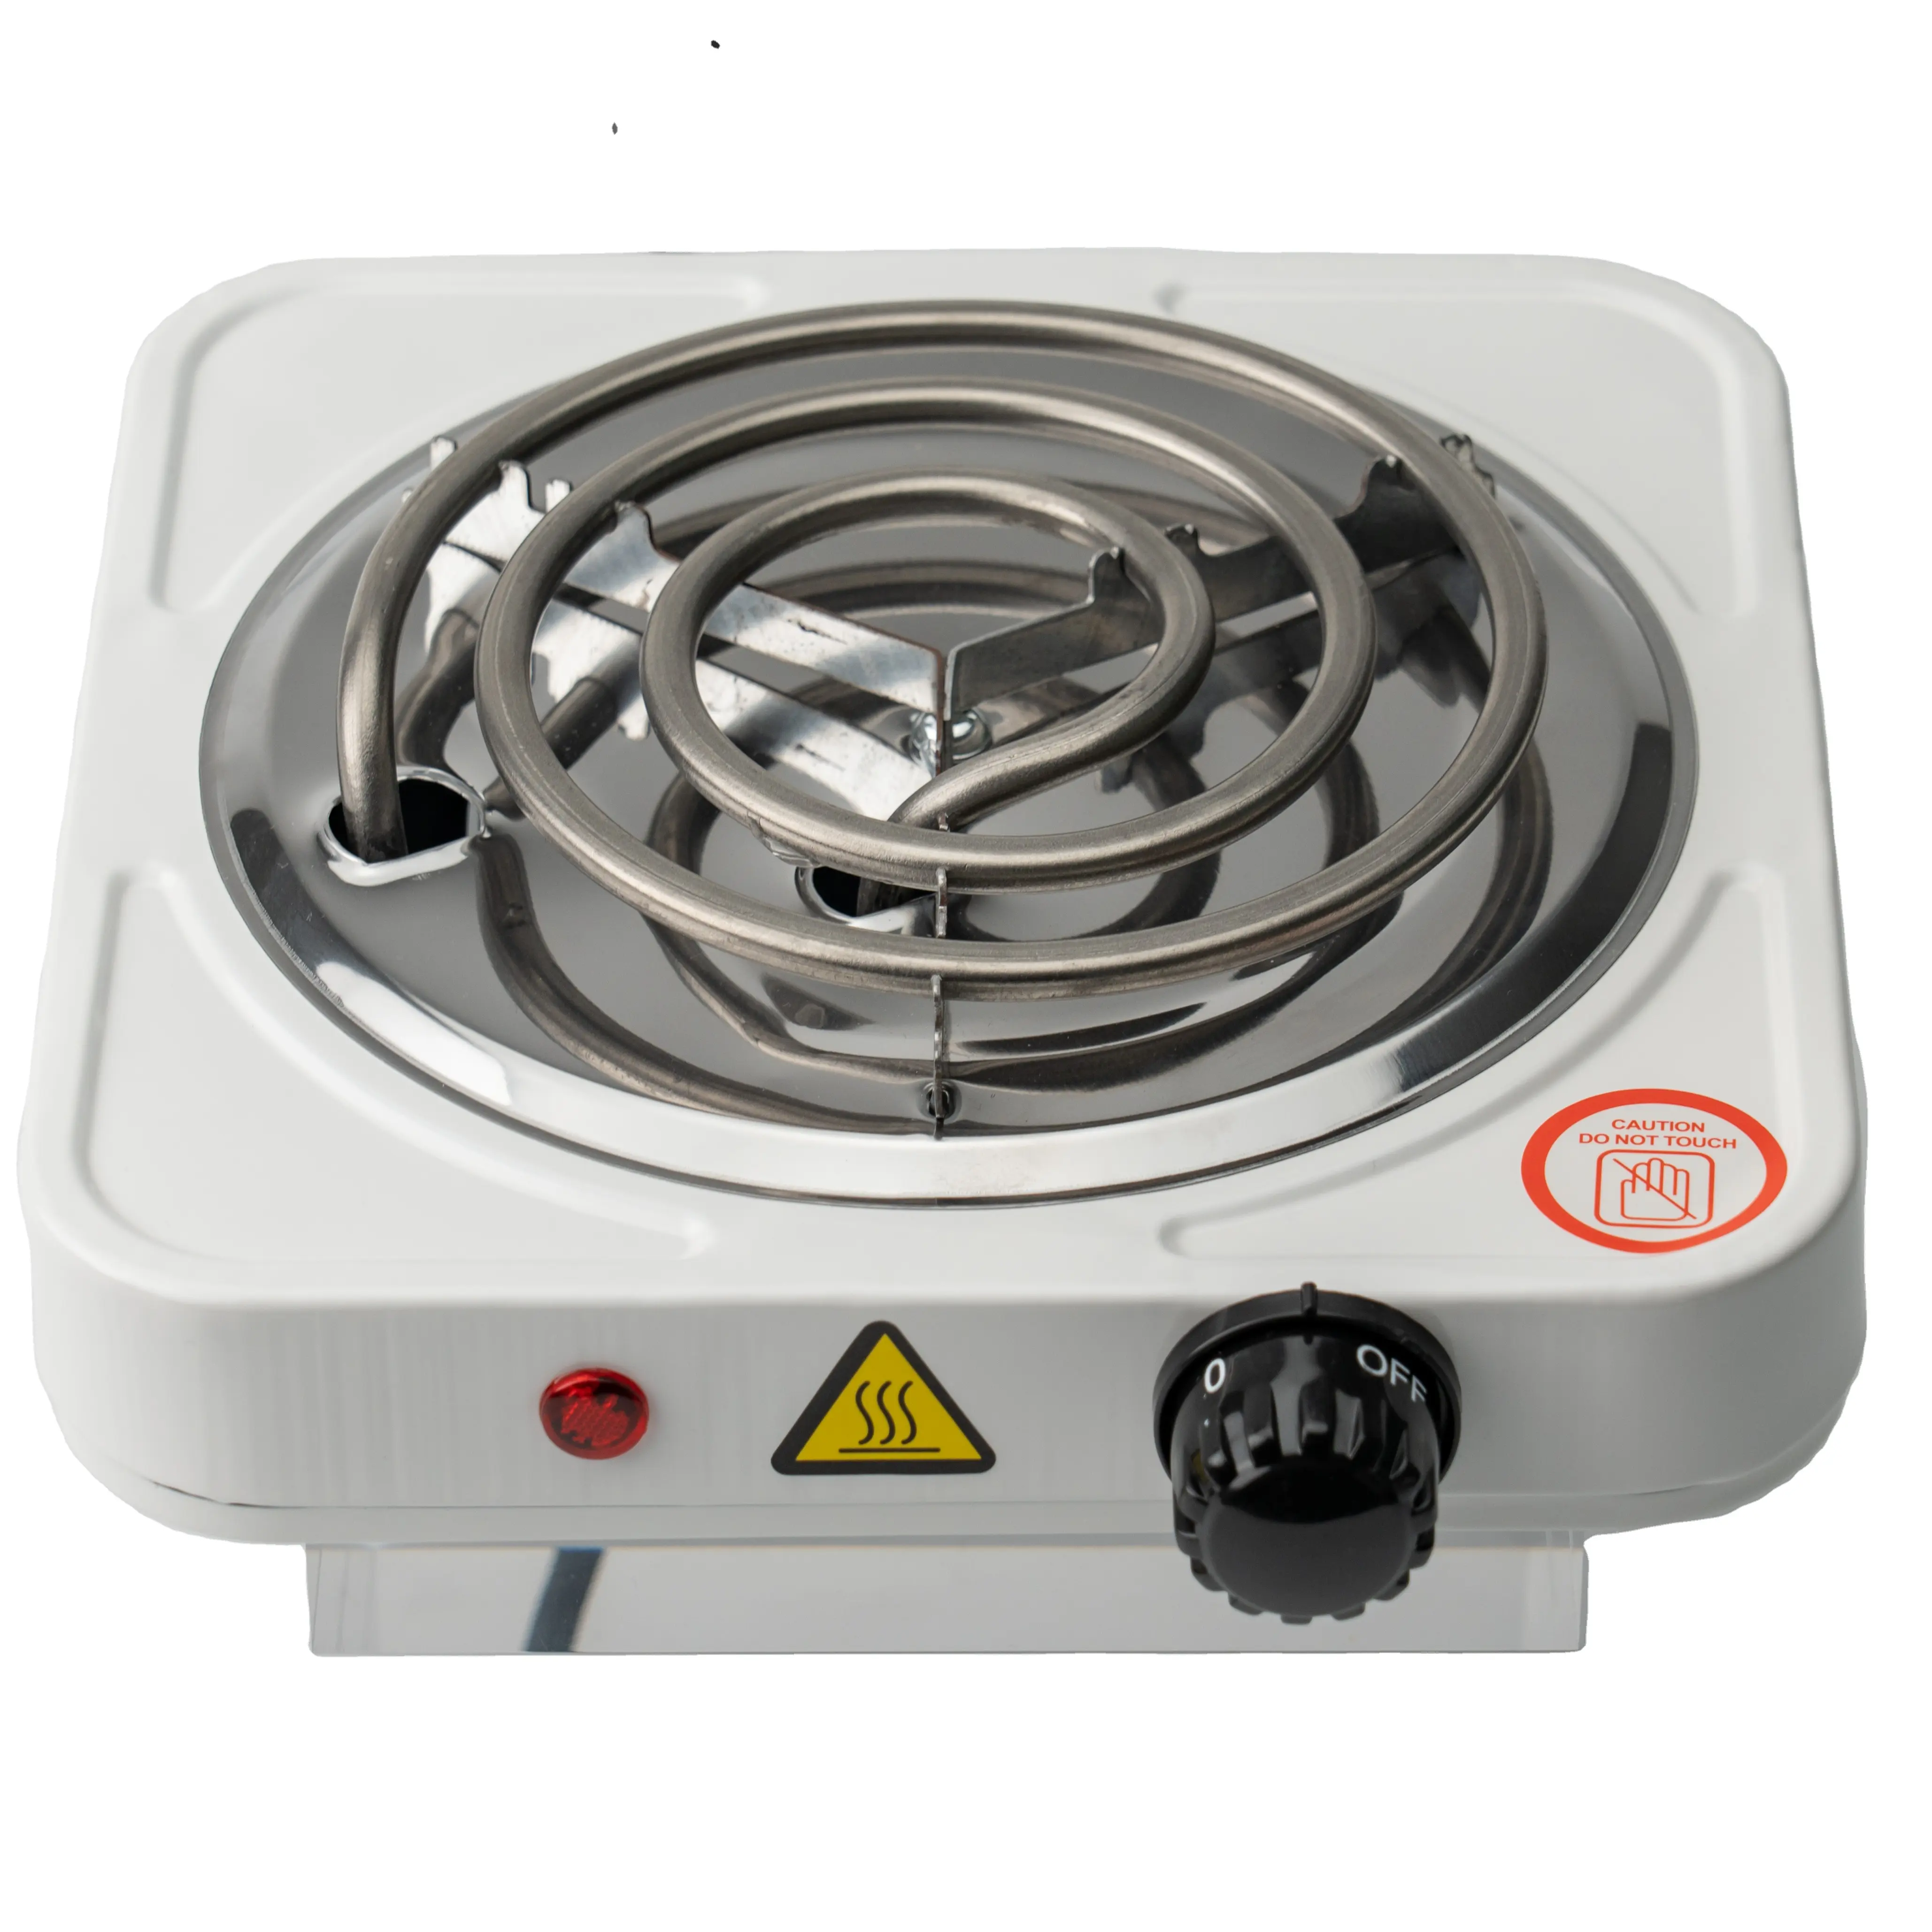 Single Burner Electric Cooking Stove Electric Cooker Heater Spiral Coil Hot Plate Multipurpose Portable Home Fast Cooking 1000W